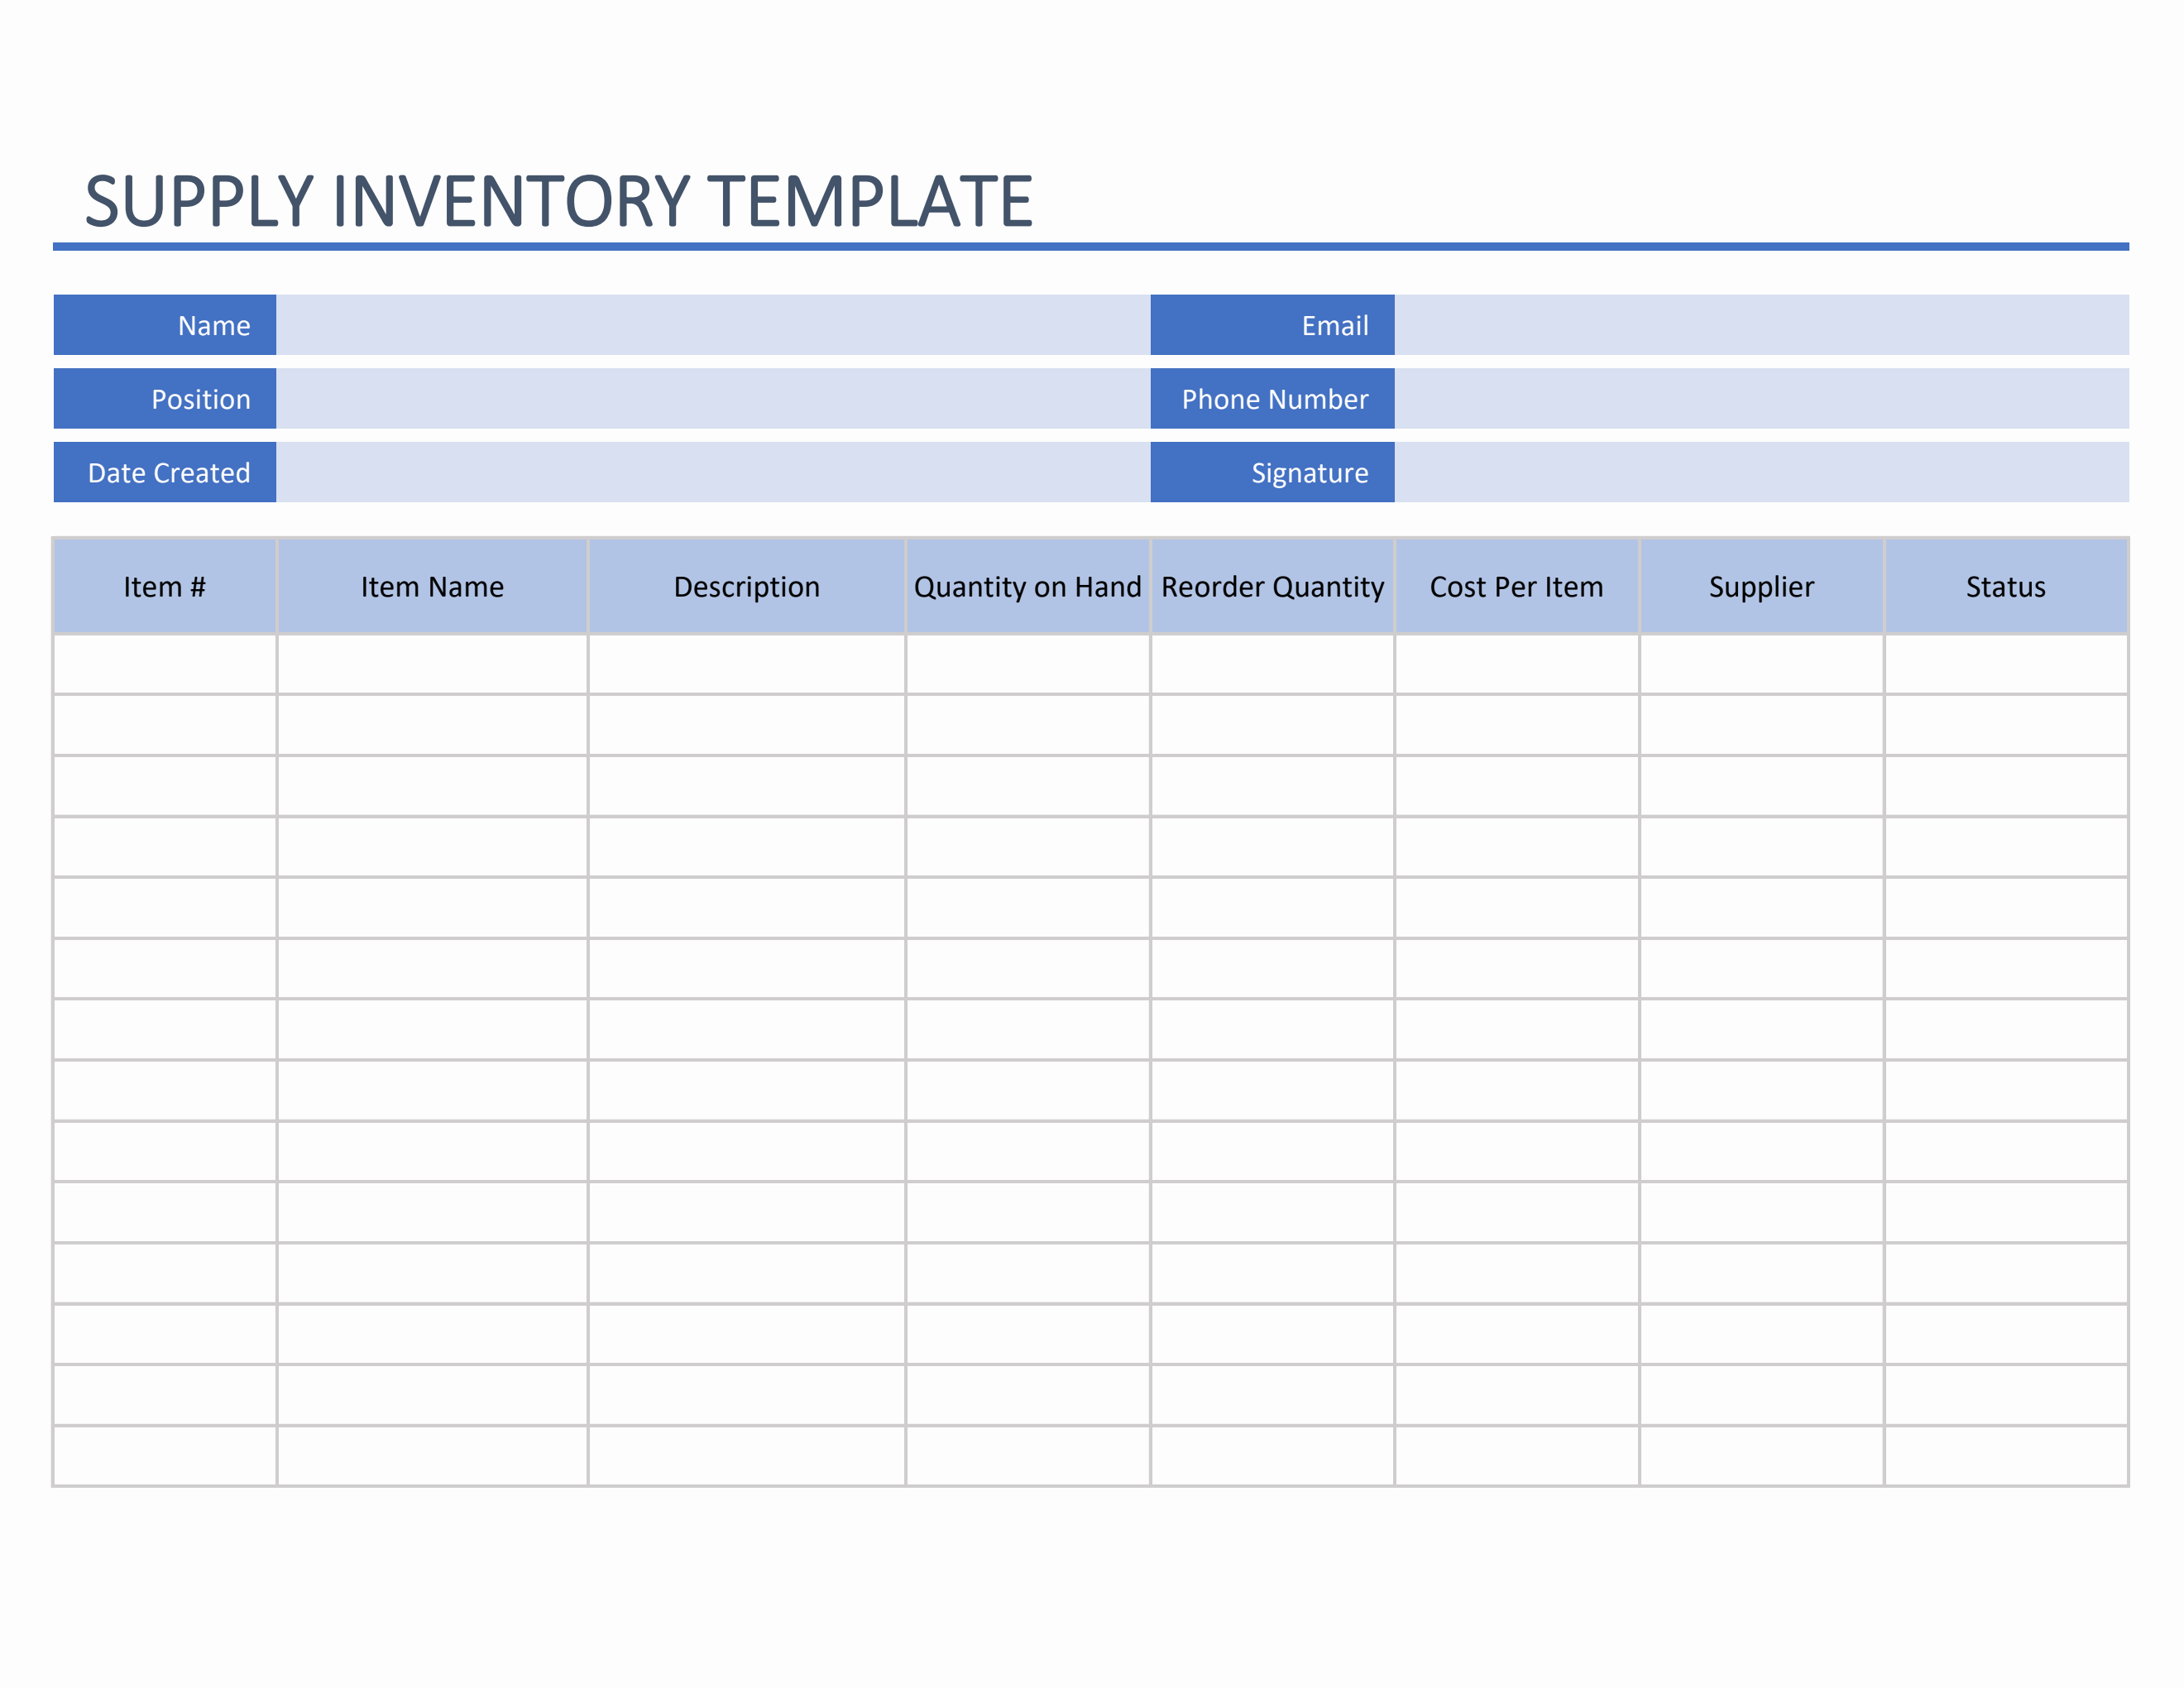 food inventory template excel